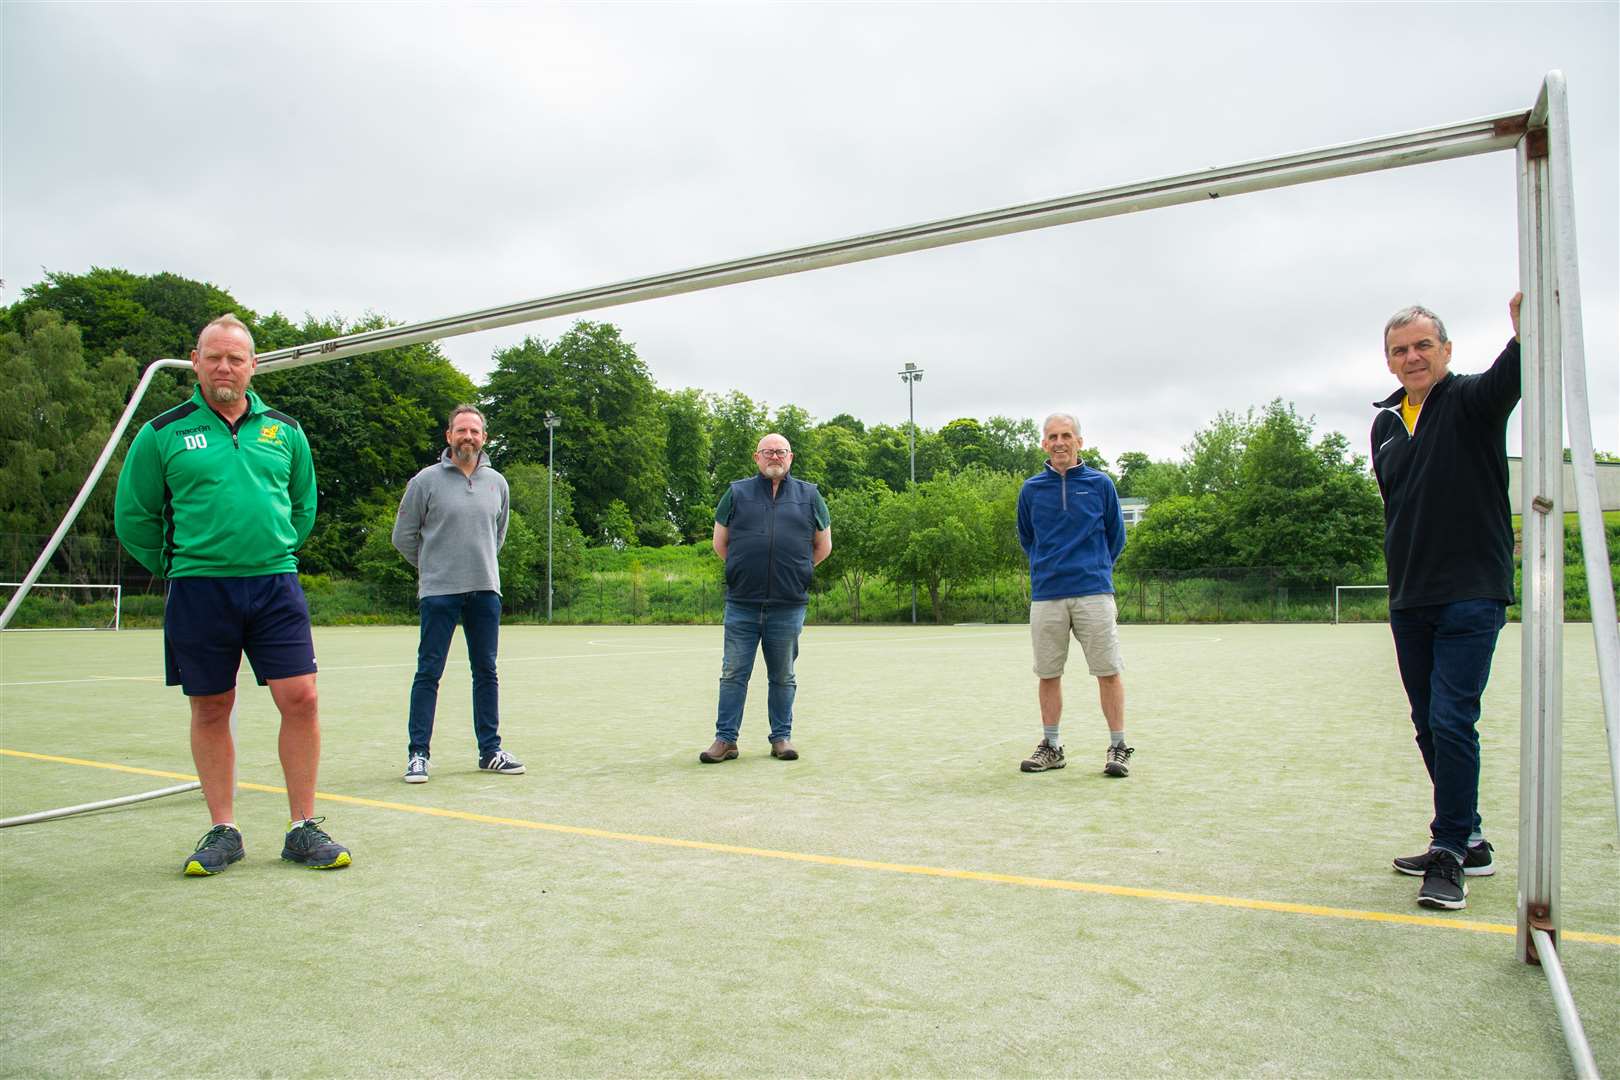 Members of the Huntly Sports Trust, from the left, Chris Lee, Dave Liston, Bruce Murray, Ian Little and Allan Mitchell at the all-weather pitch which is to be overhauled. Picture: Daniel Forsyth.